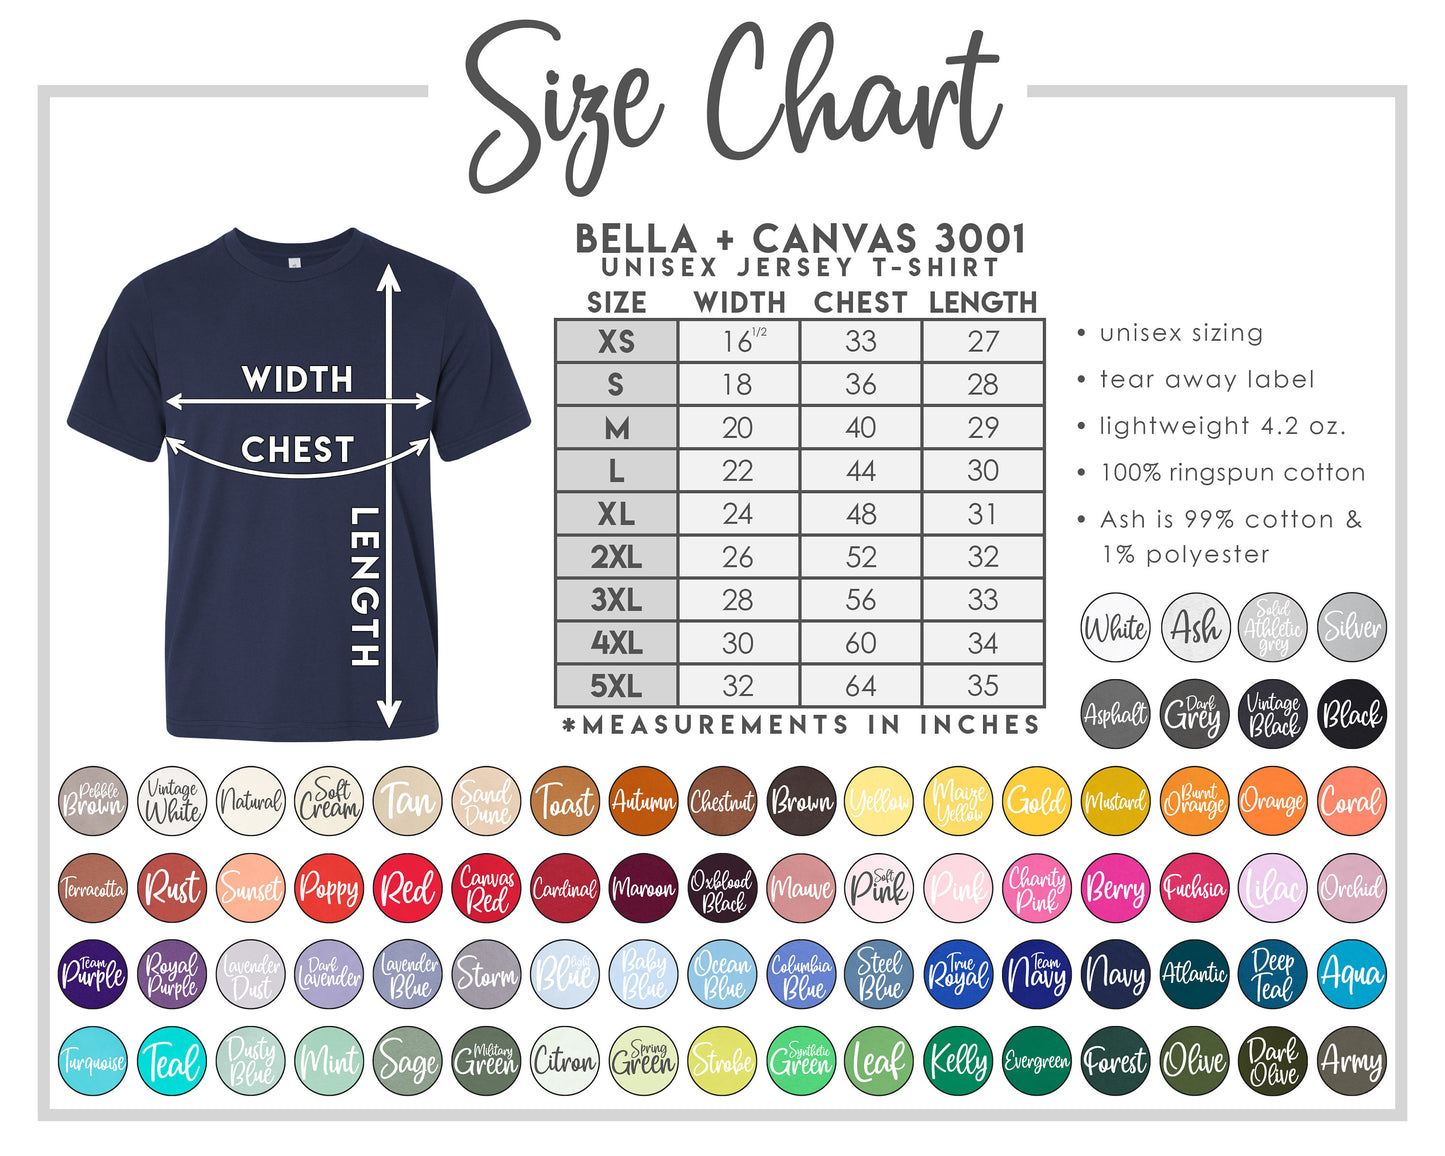 Blank Bella Canvas Tees, 3001 and 3001CVC Blank T-Shirts for Sublimation, Screen Print, HTV